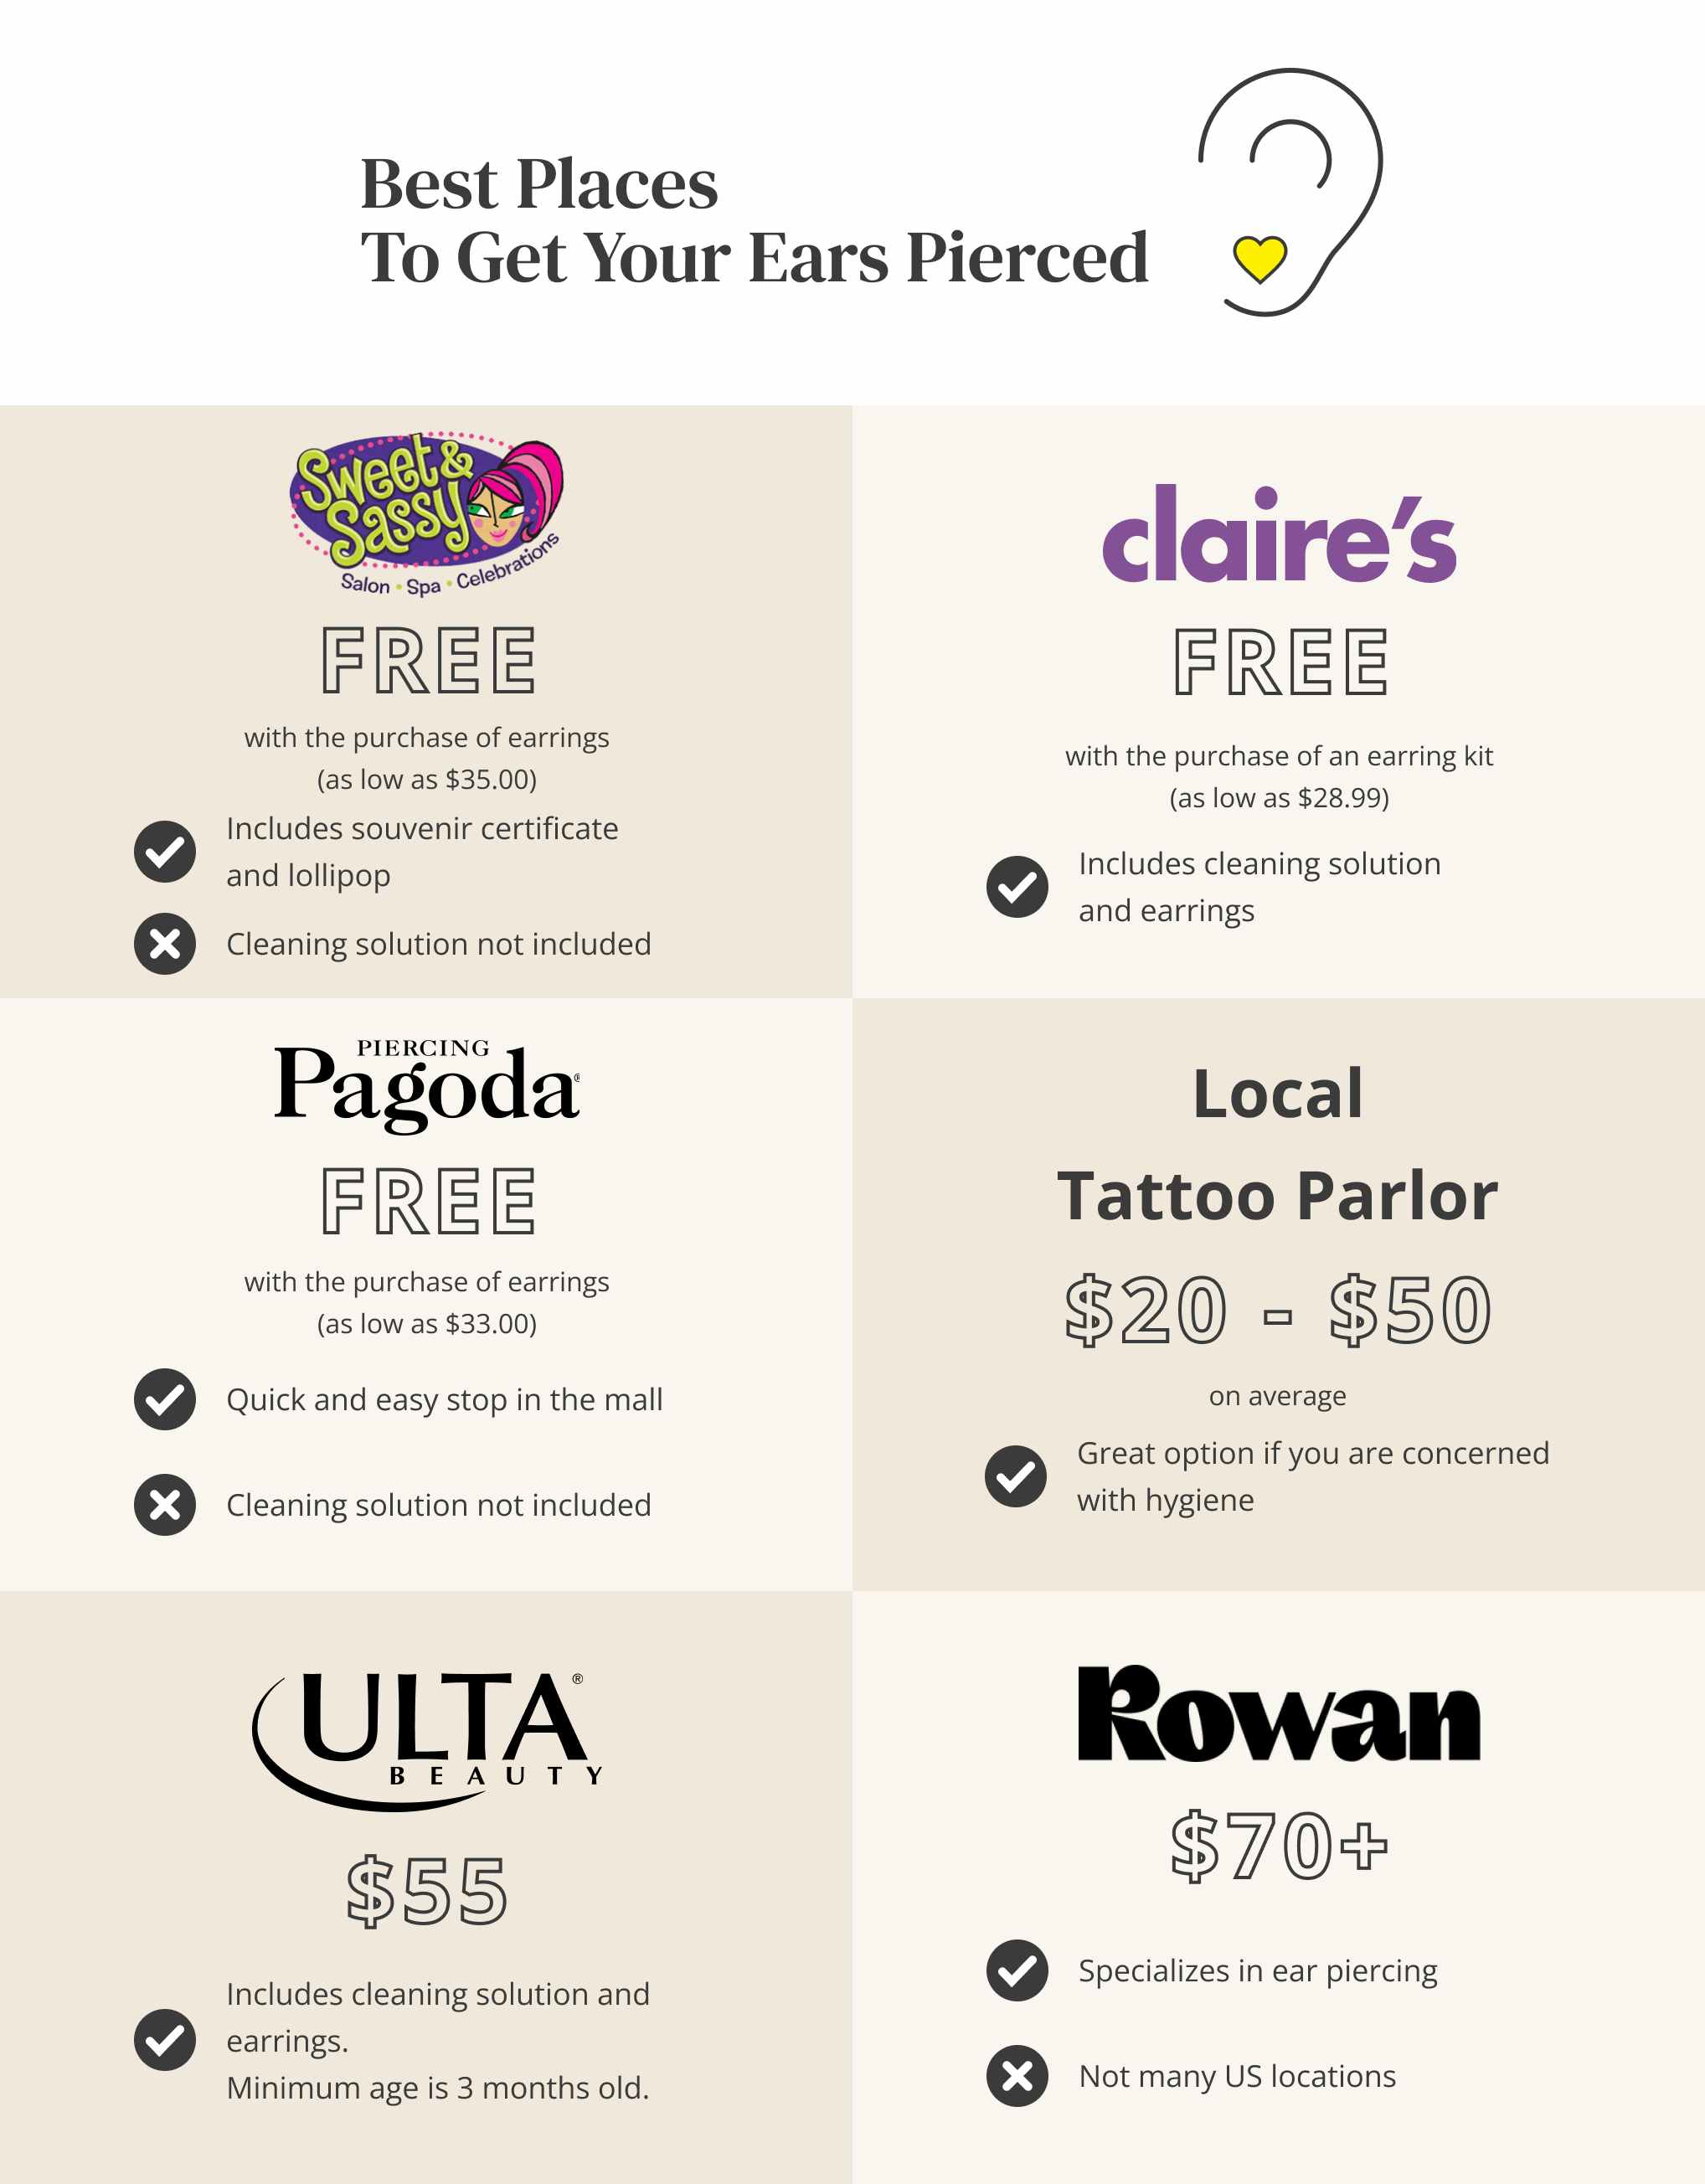 The pros and cons of places to get your ears pierced like Claire's and Piercing Pagoda.